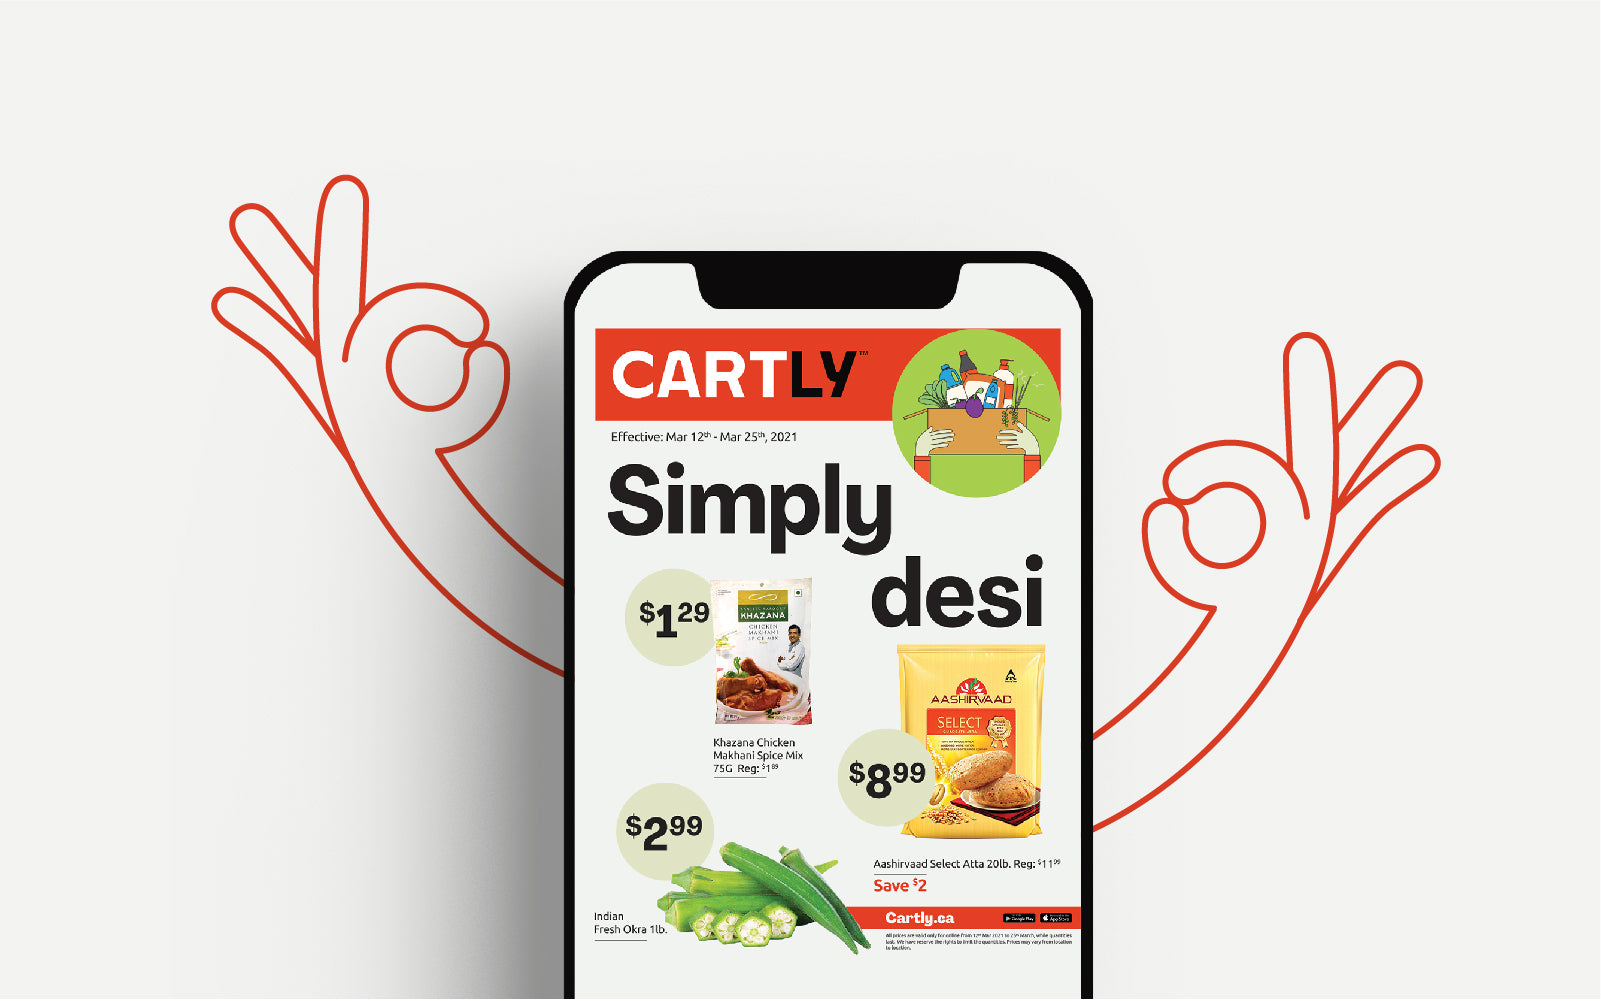 Indian Grocery Store Deals - Cartly